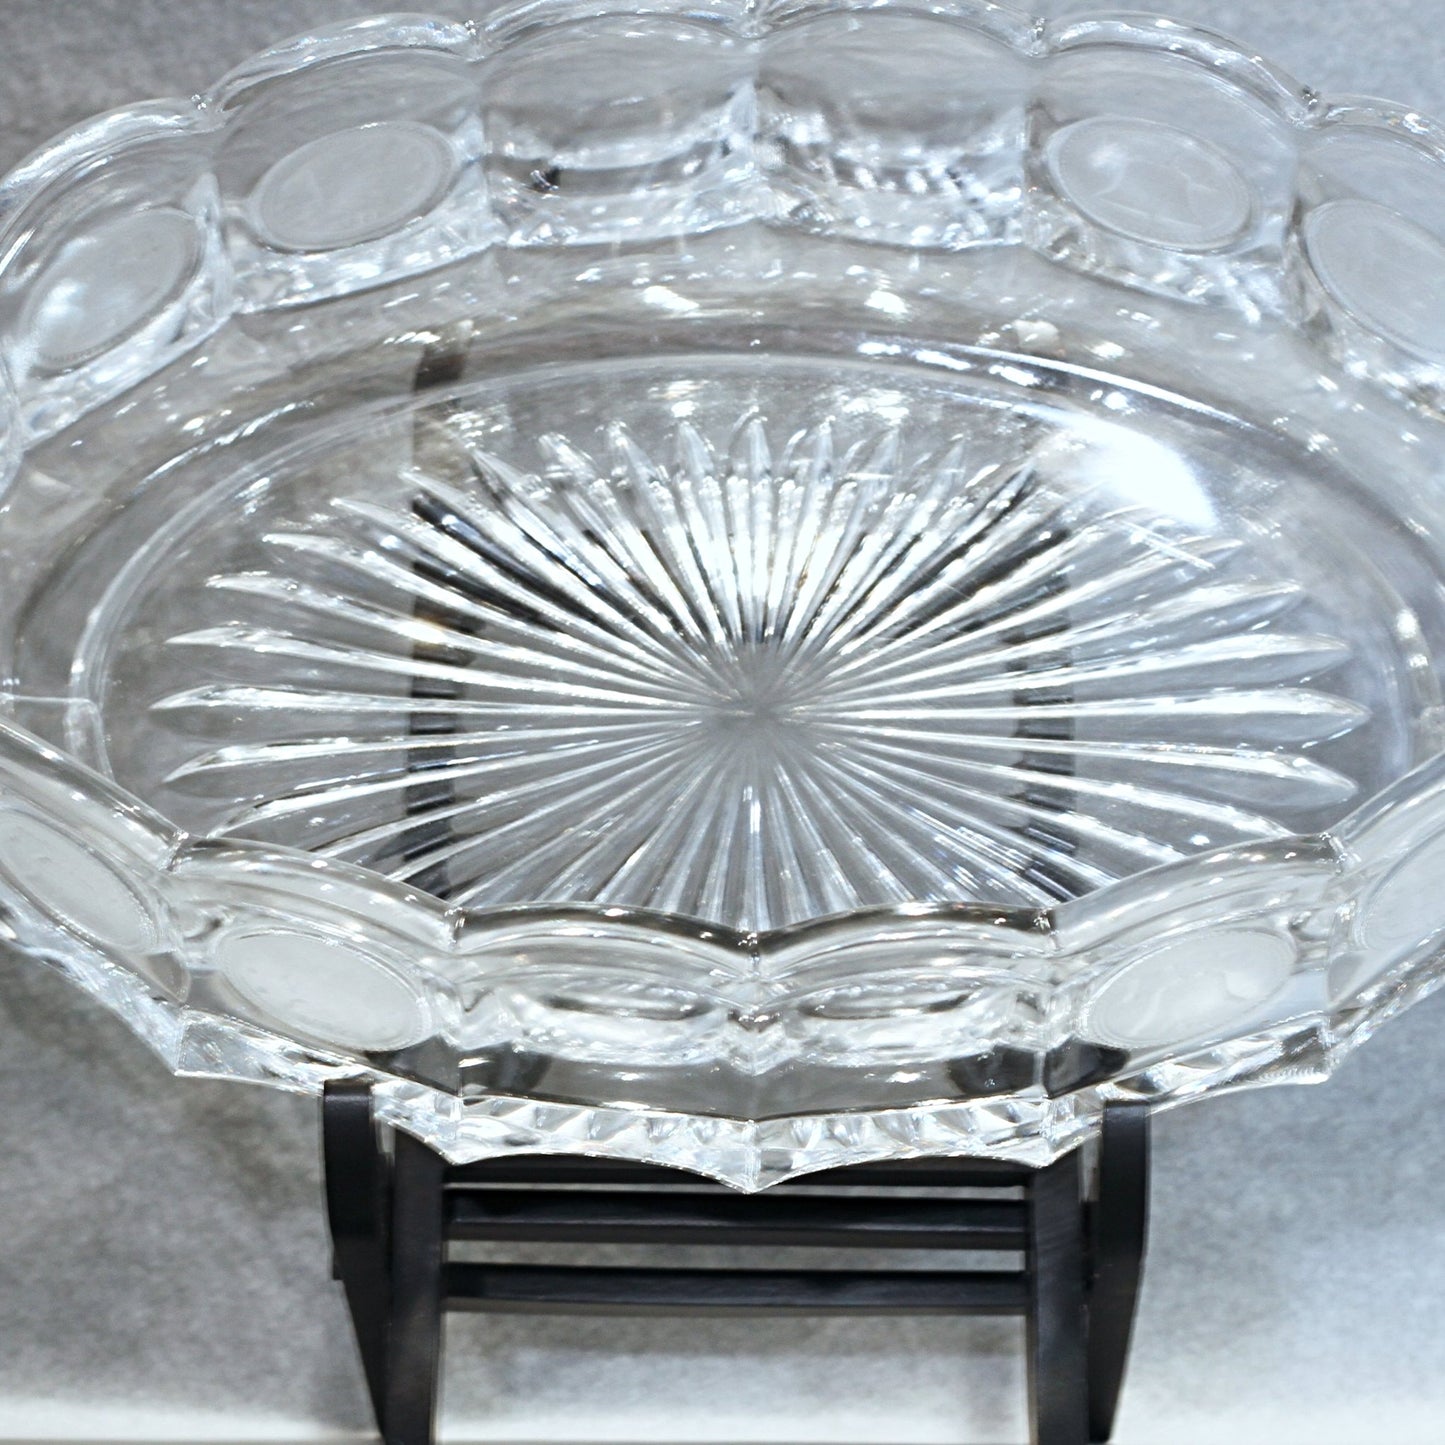 CLEAR COIN PATTERN Oval Bowl Circa 1958 - 1981